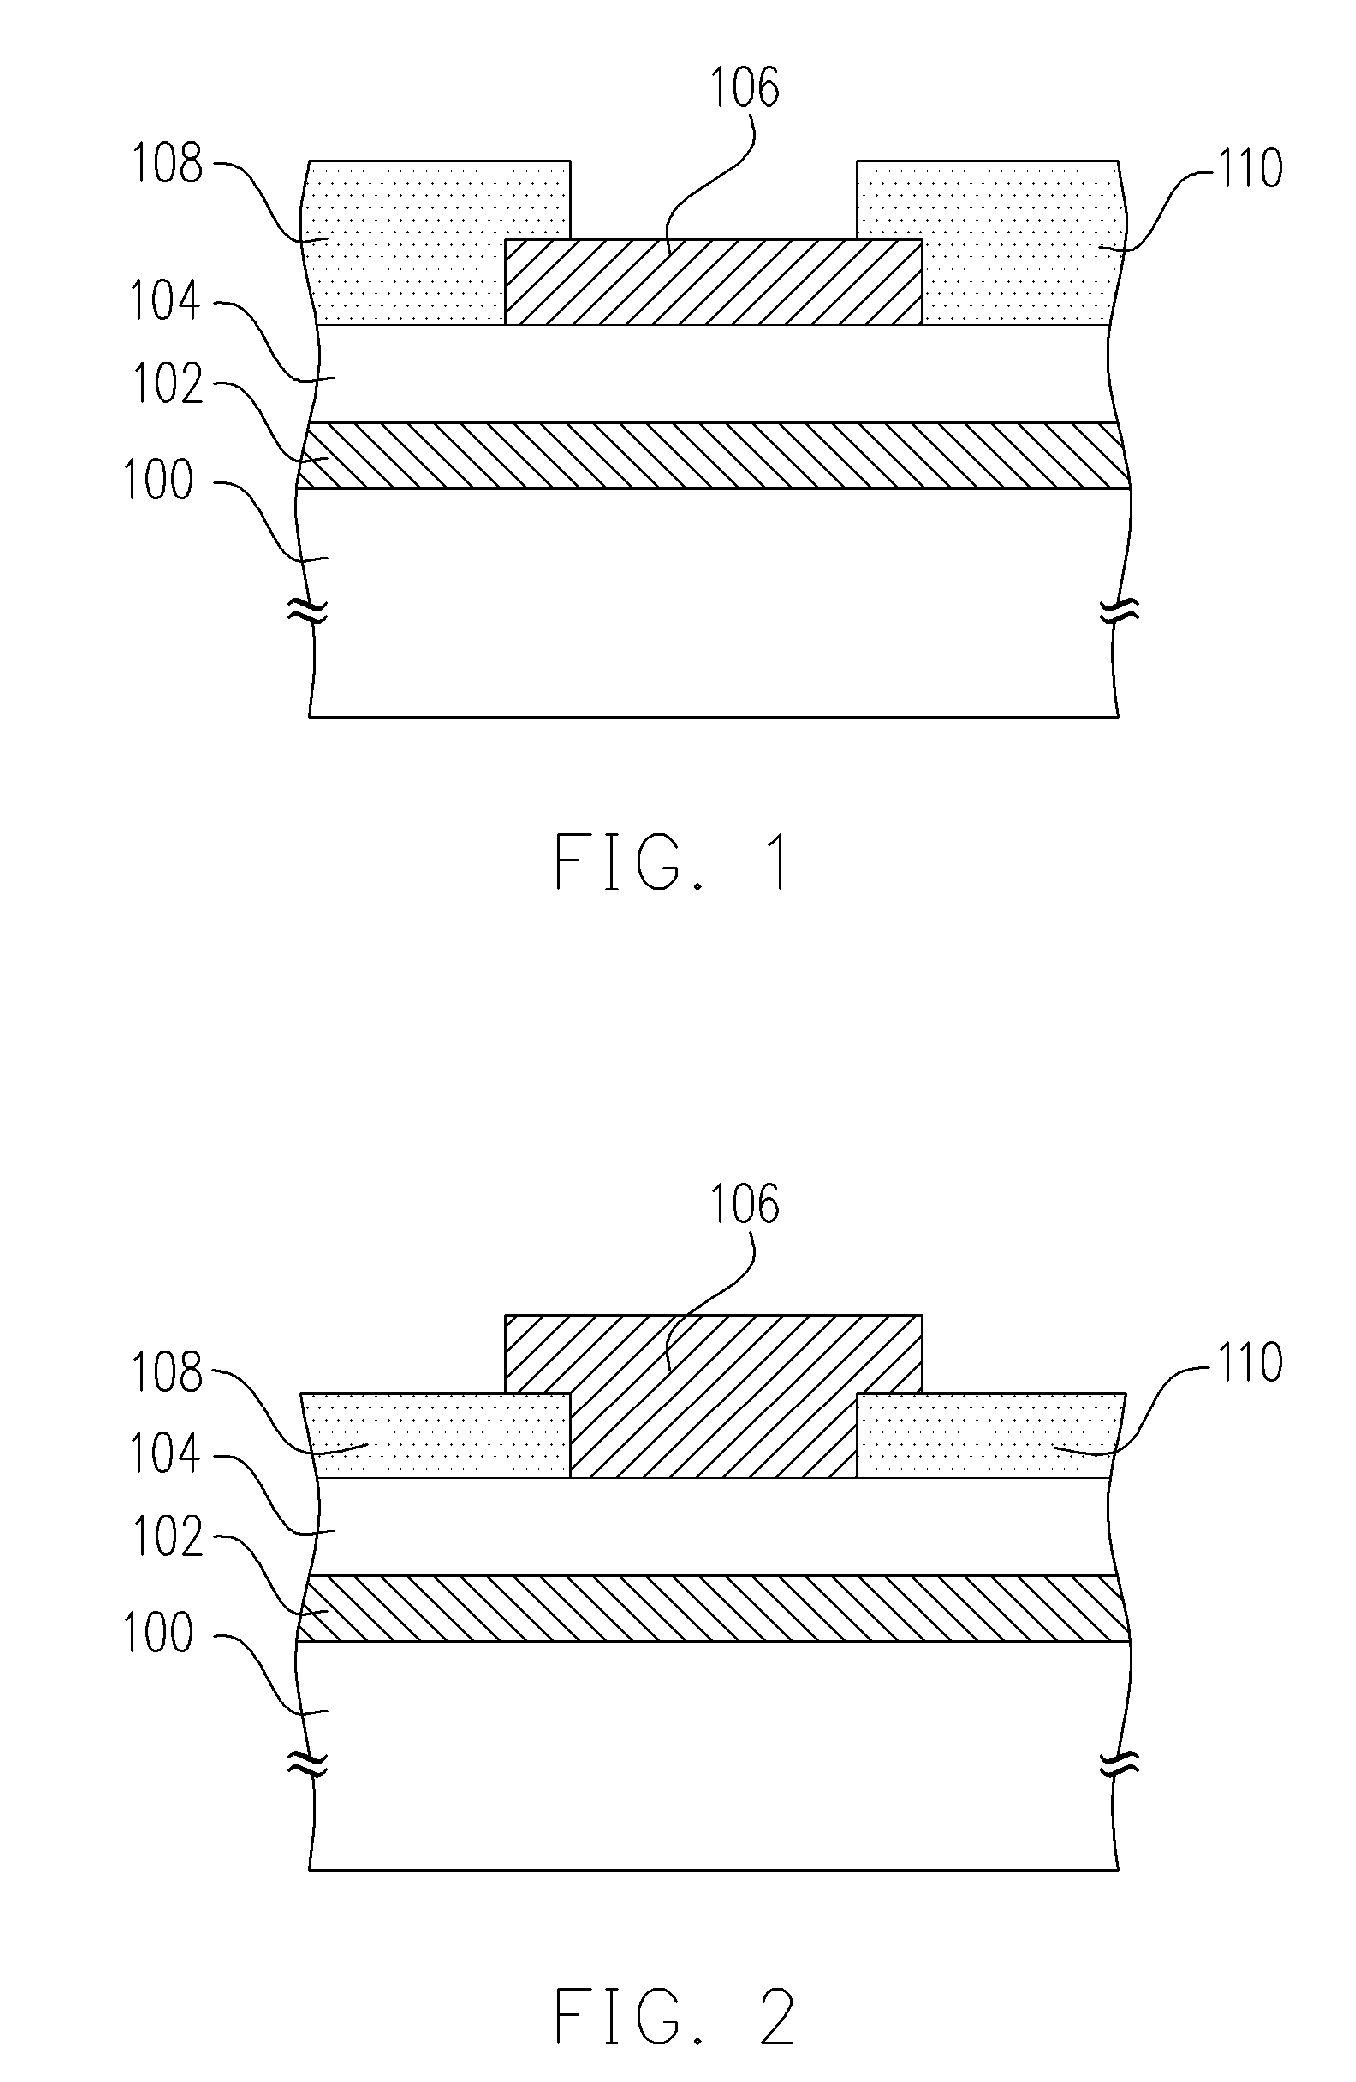 Dielectric layer, composition and method for forming the same